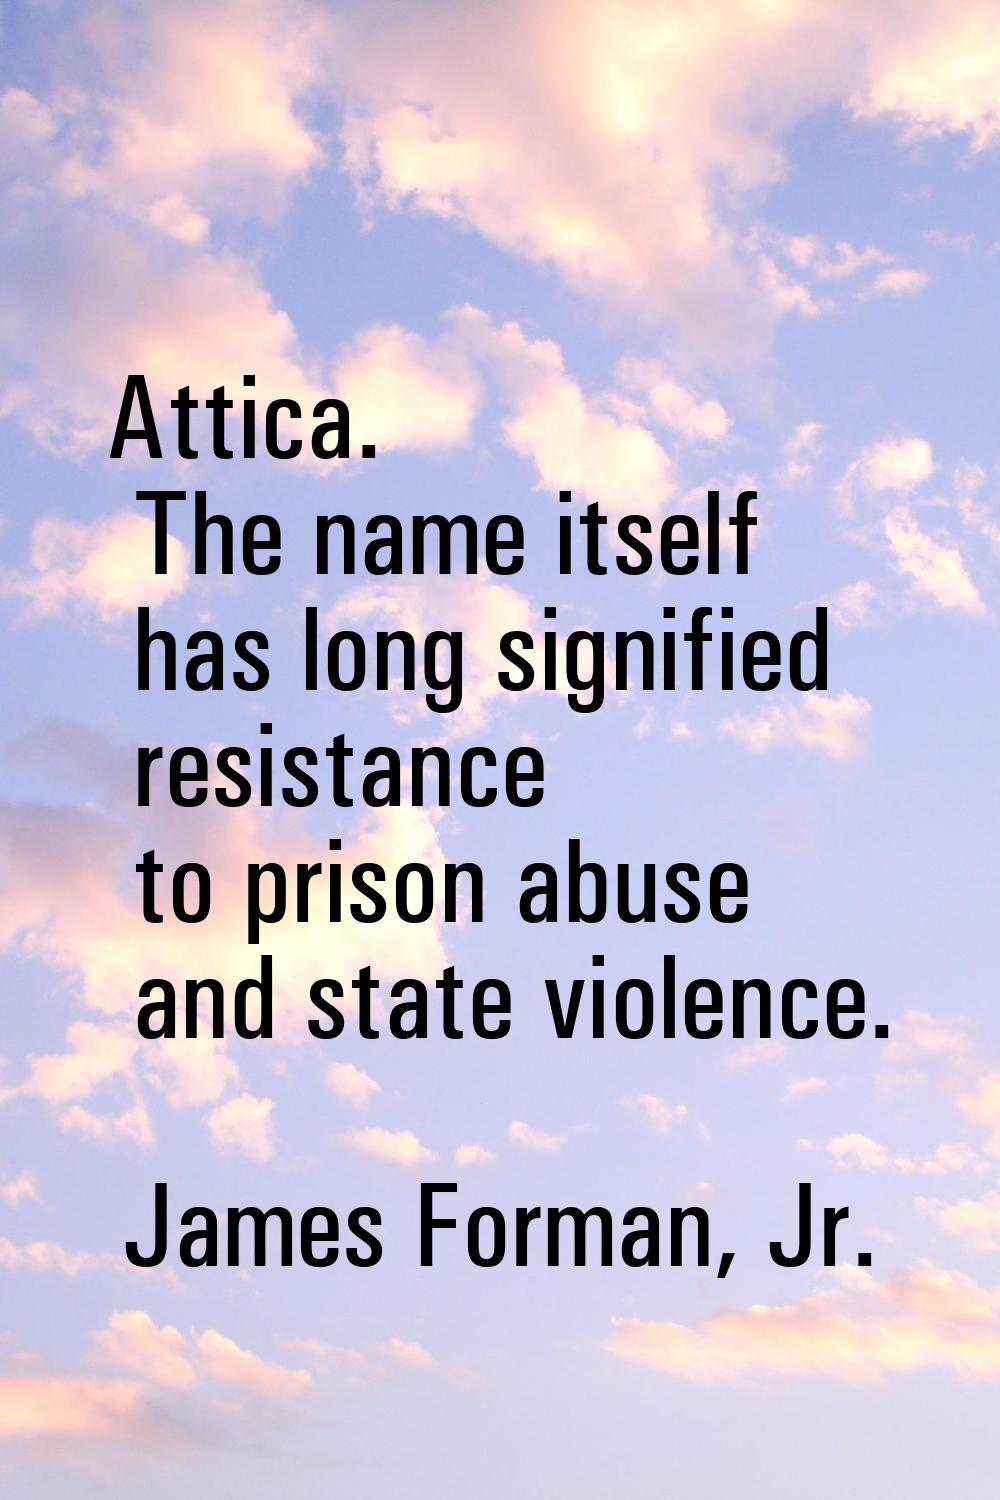 Attica. The name itself has long signified resistance to prison abuse and state violence.